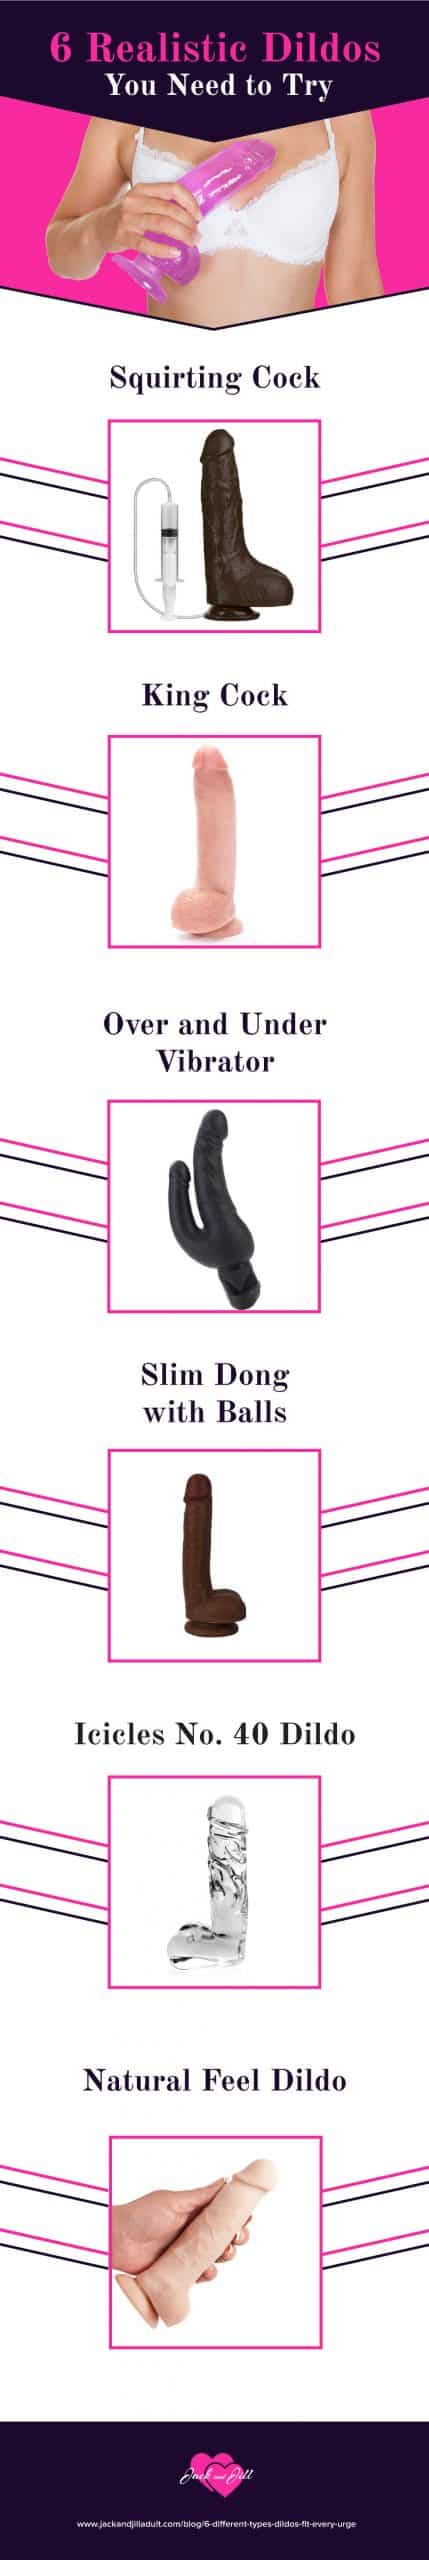 Infographic for 6 Realistic Dildos You Need to Try